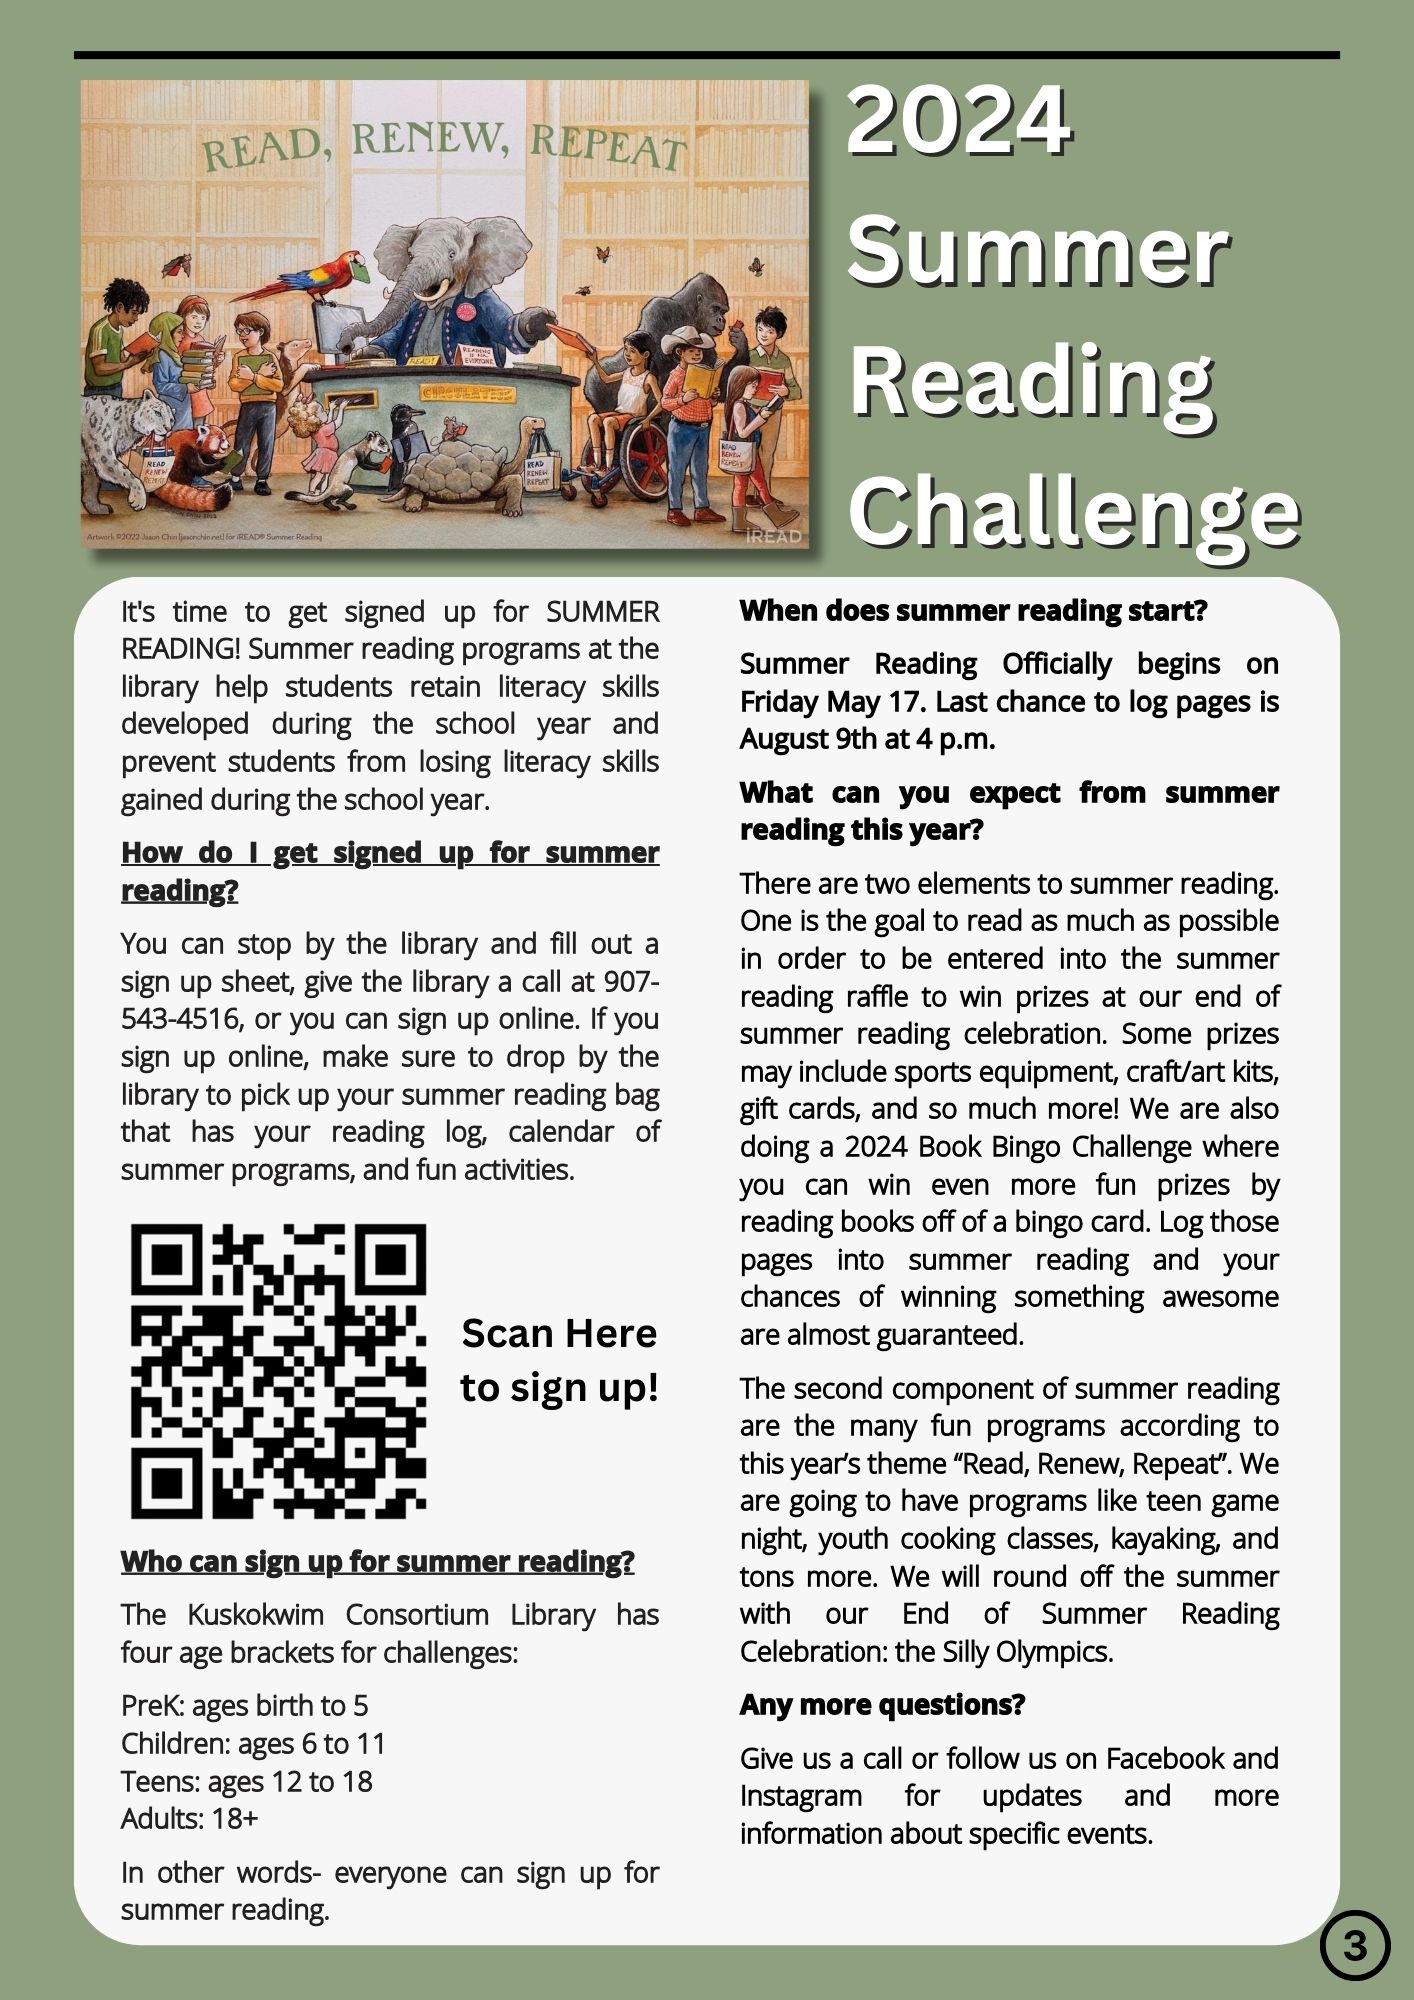 Sign up for summer reading here!